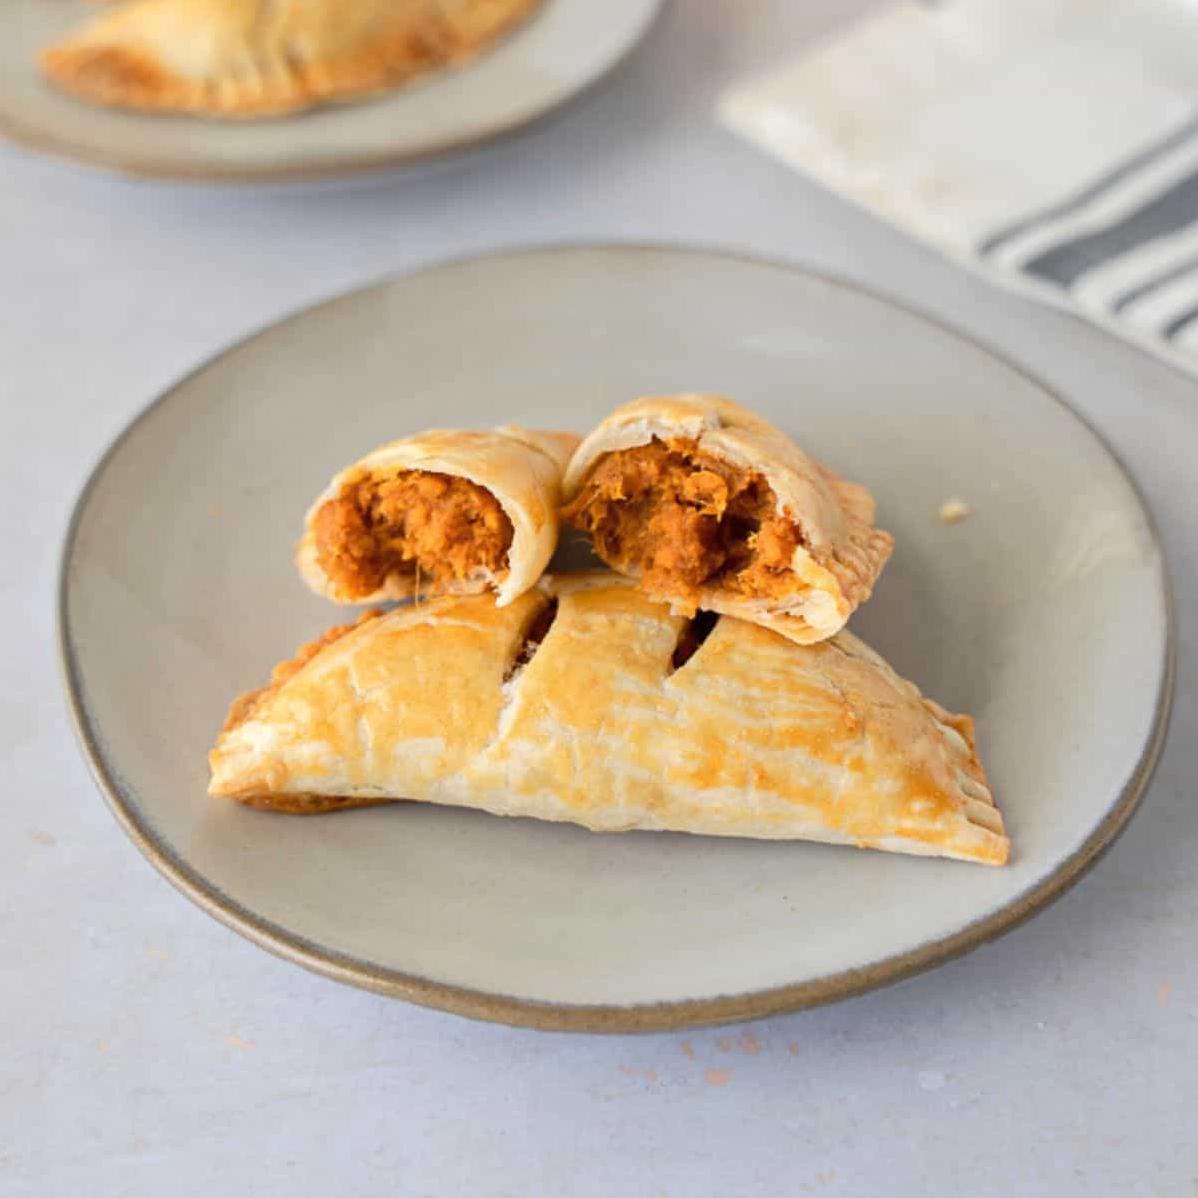  One bite of these empanadas and you'll be transported to Latin America.